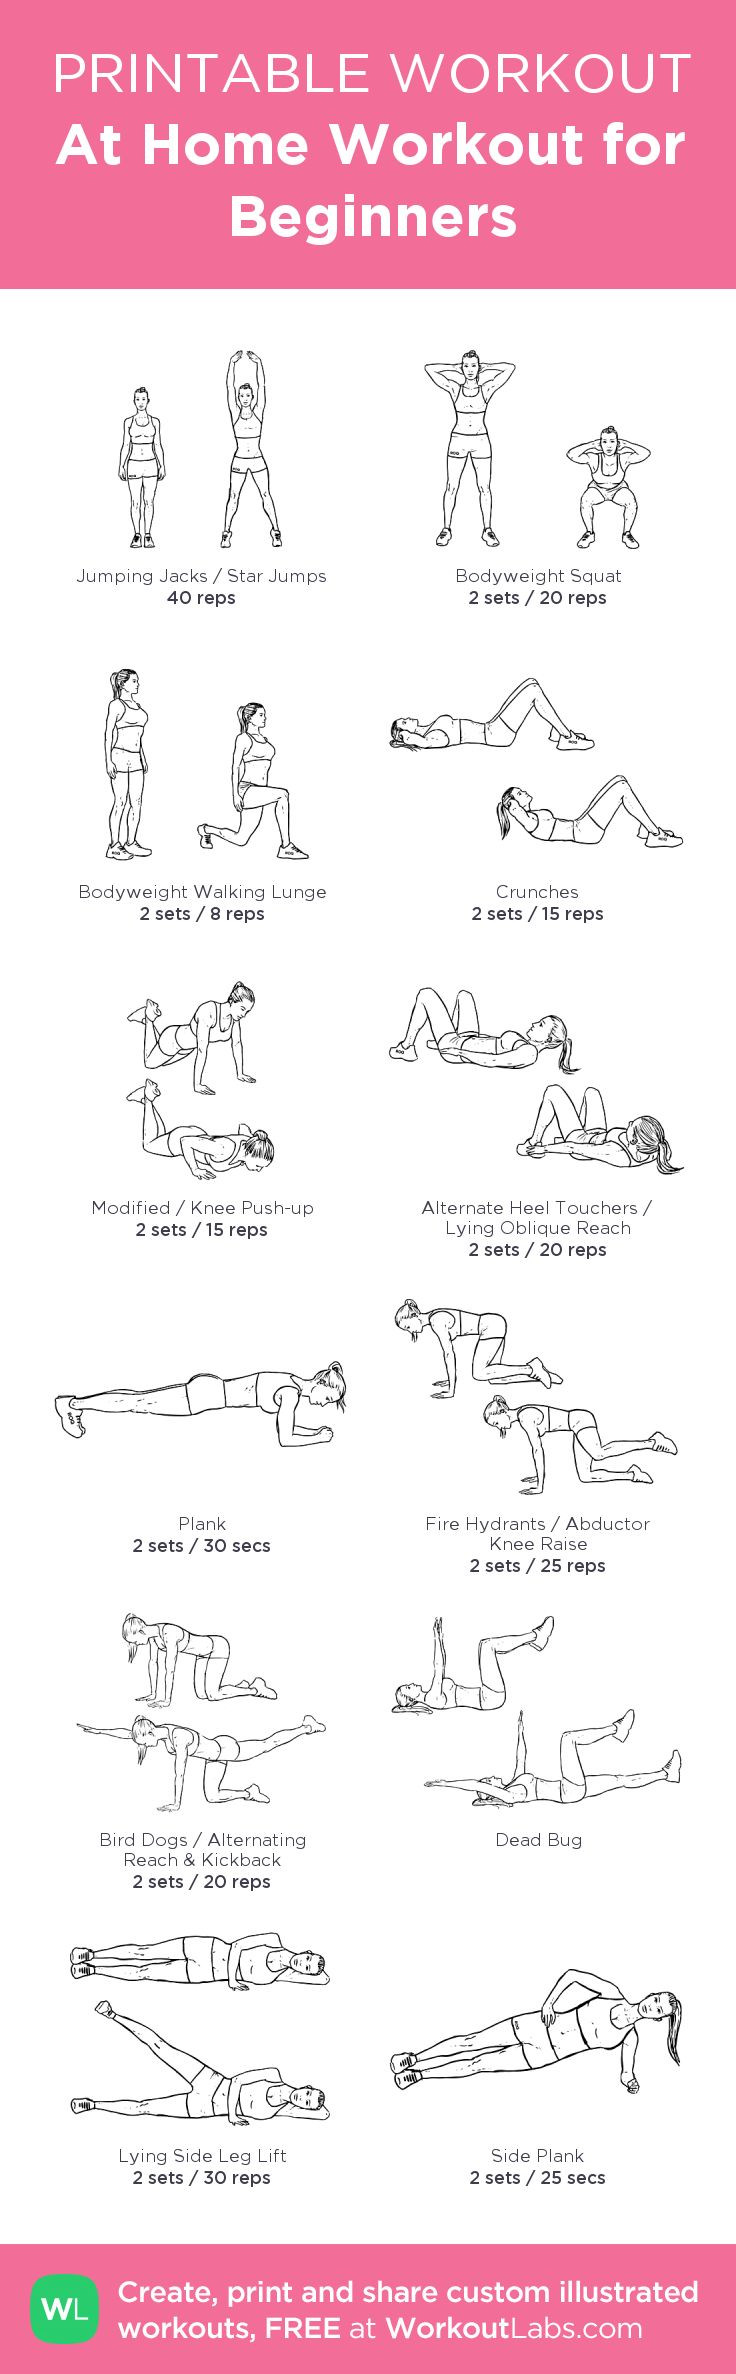 Weight Loss Exercises At Home For Beginners
 2159 best Home Workouts and Exercises images on Pinterest